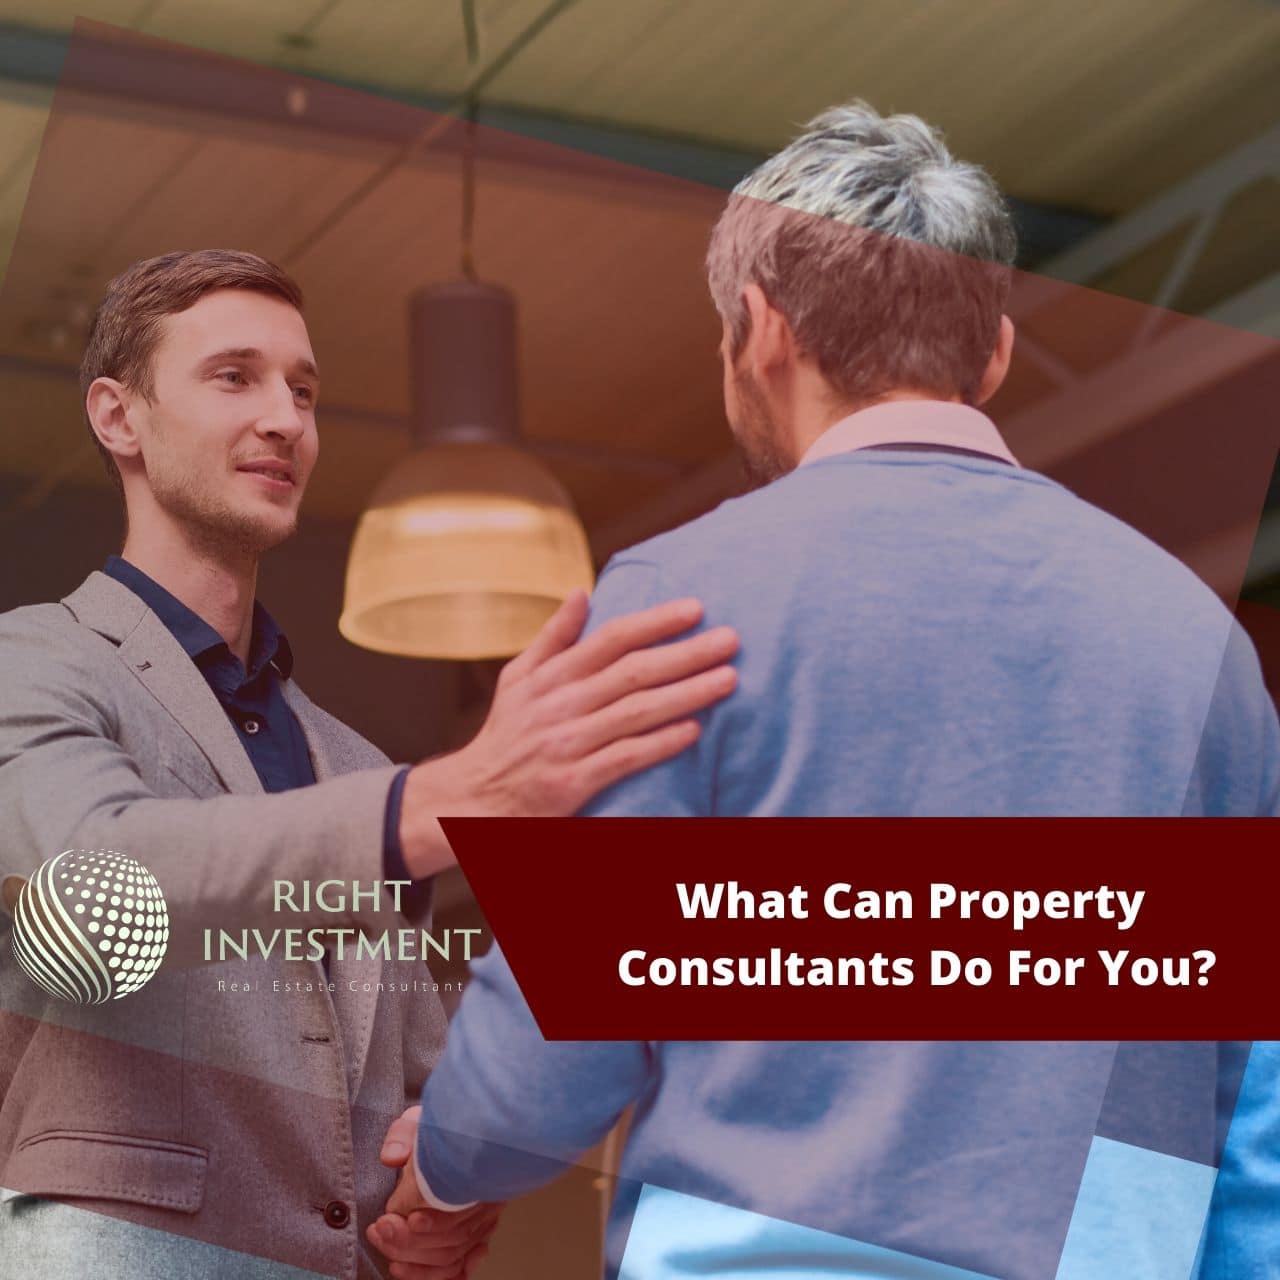 Why would it be preferable to deal with a real estate consultant when buying a property?